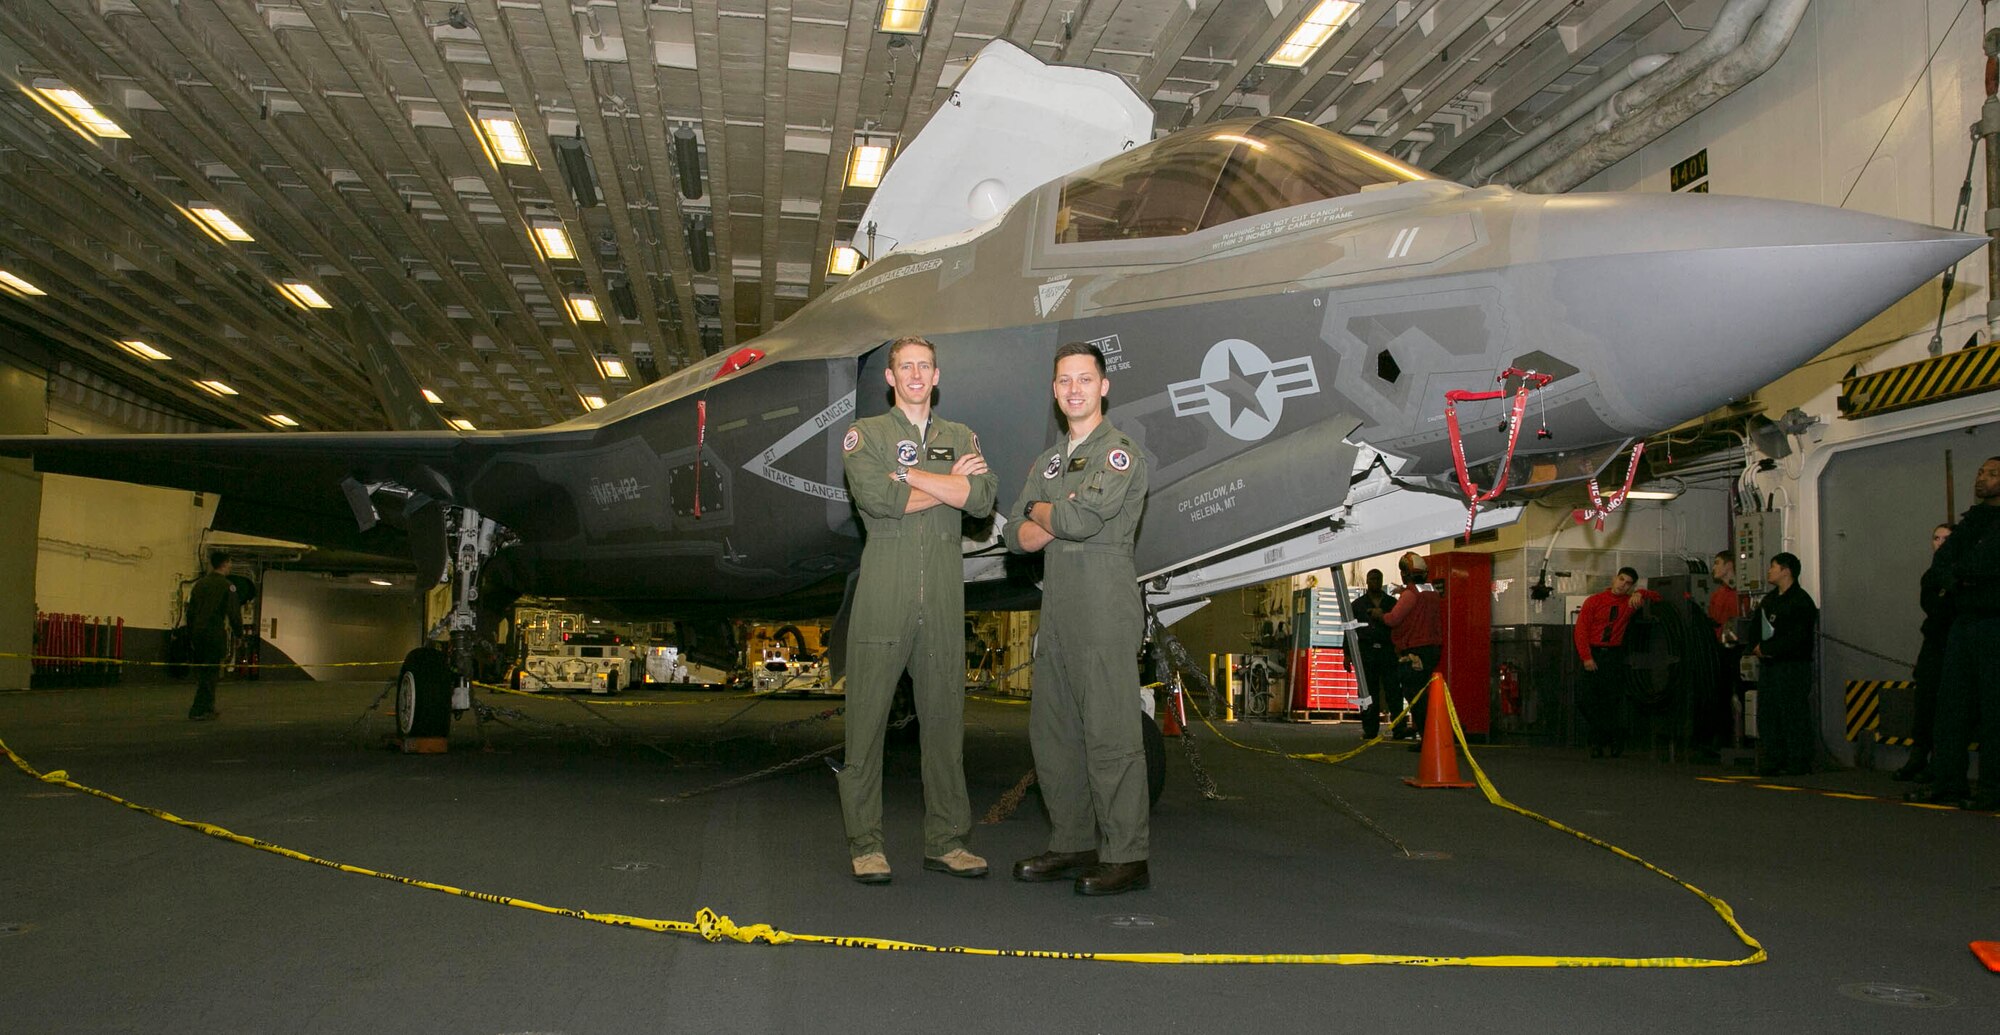 U.S. Air Force Capt. Spencer G. Weide, left, and Capt. Justin J. Newman, F-35B Lightning IIs pilots with Marine Fighter Attack Squadron (VMFA) 122, Marine Aircraft Group (MAG) 13, 3rd Marine Aircraft Wing (MAW), pose with an F-35 aboard the amphibious assault ship USS America (LHA 6) during routine operations in the eastern Pacific, Oct. 6, 2019.  Amphibious assault ships, such as the America, provide flexibility to the joint force by supporting a spectrum of air operations from fifth generation jets to heavy lift helicopters.(U.S. Marine Corps photo by Lance Cpl. Juan Anaya)